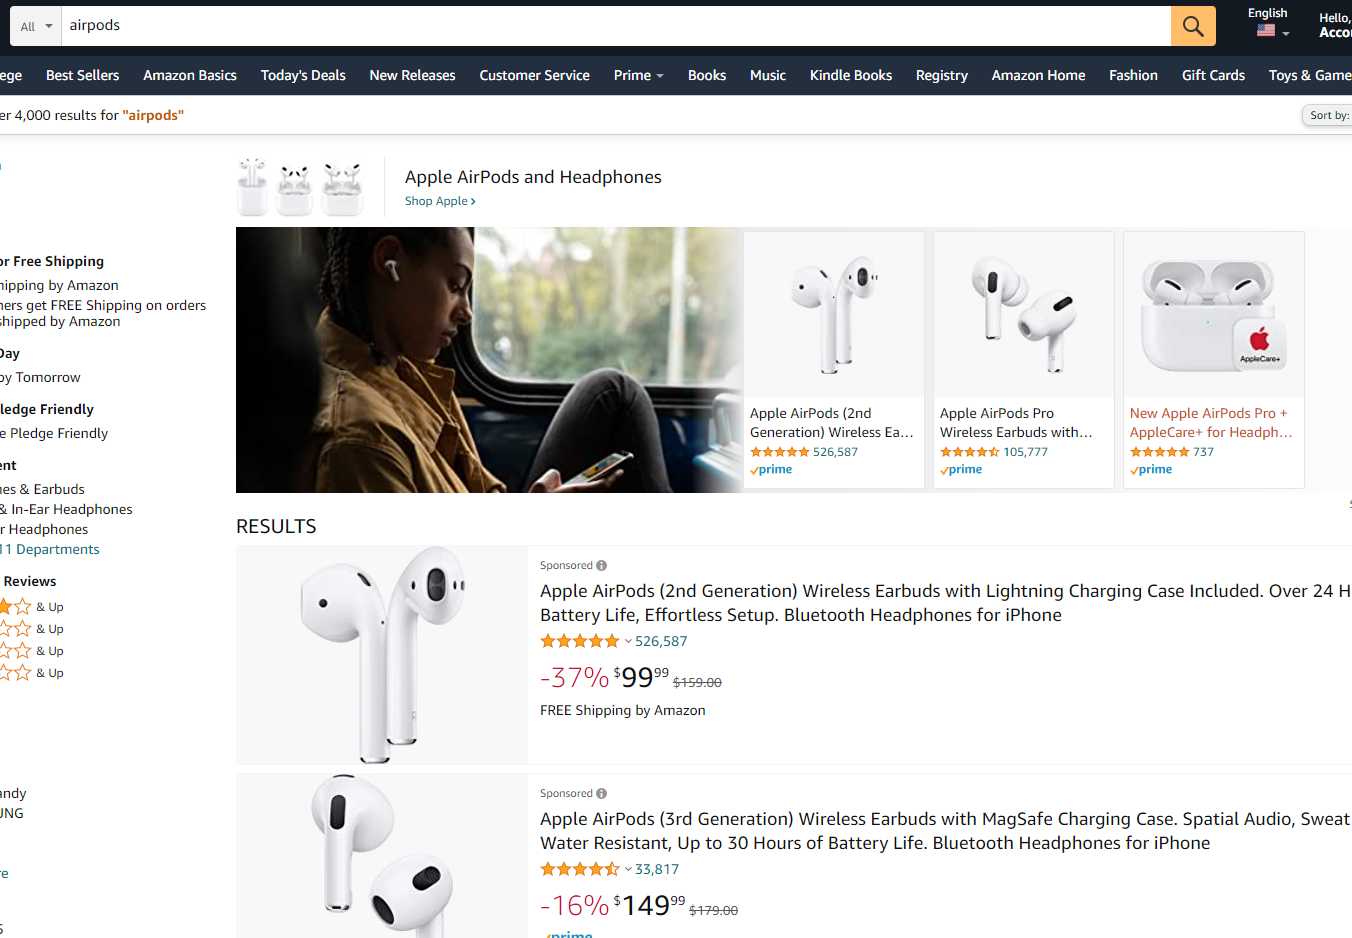 How to Share Amazon Product Link for Browser1